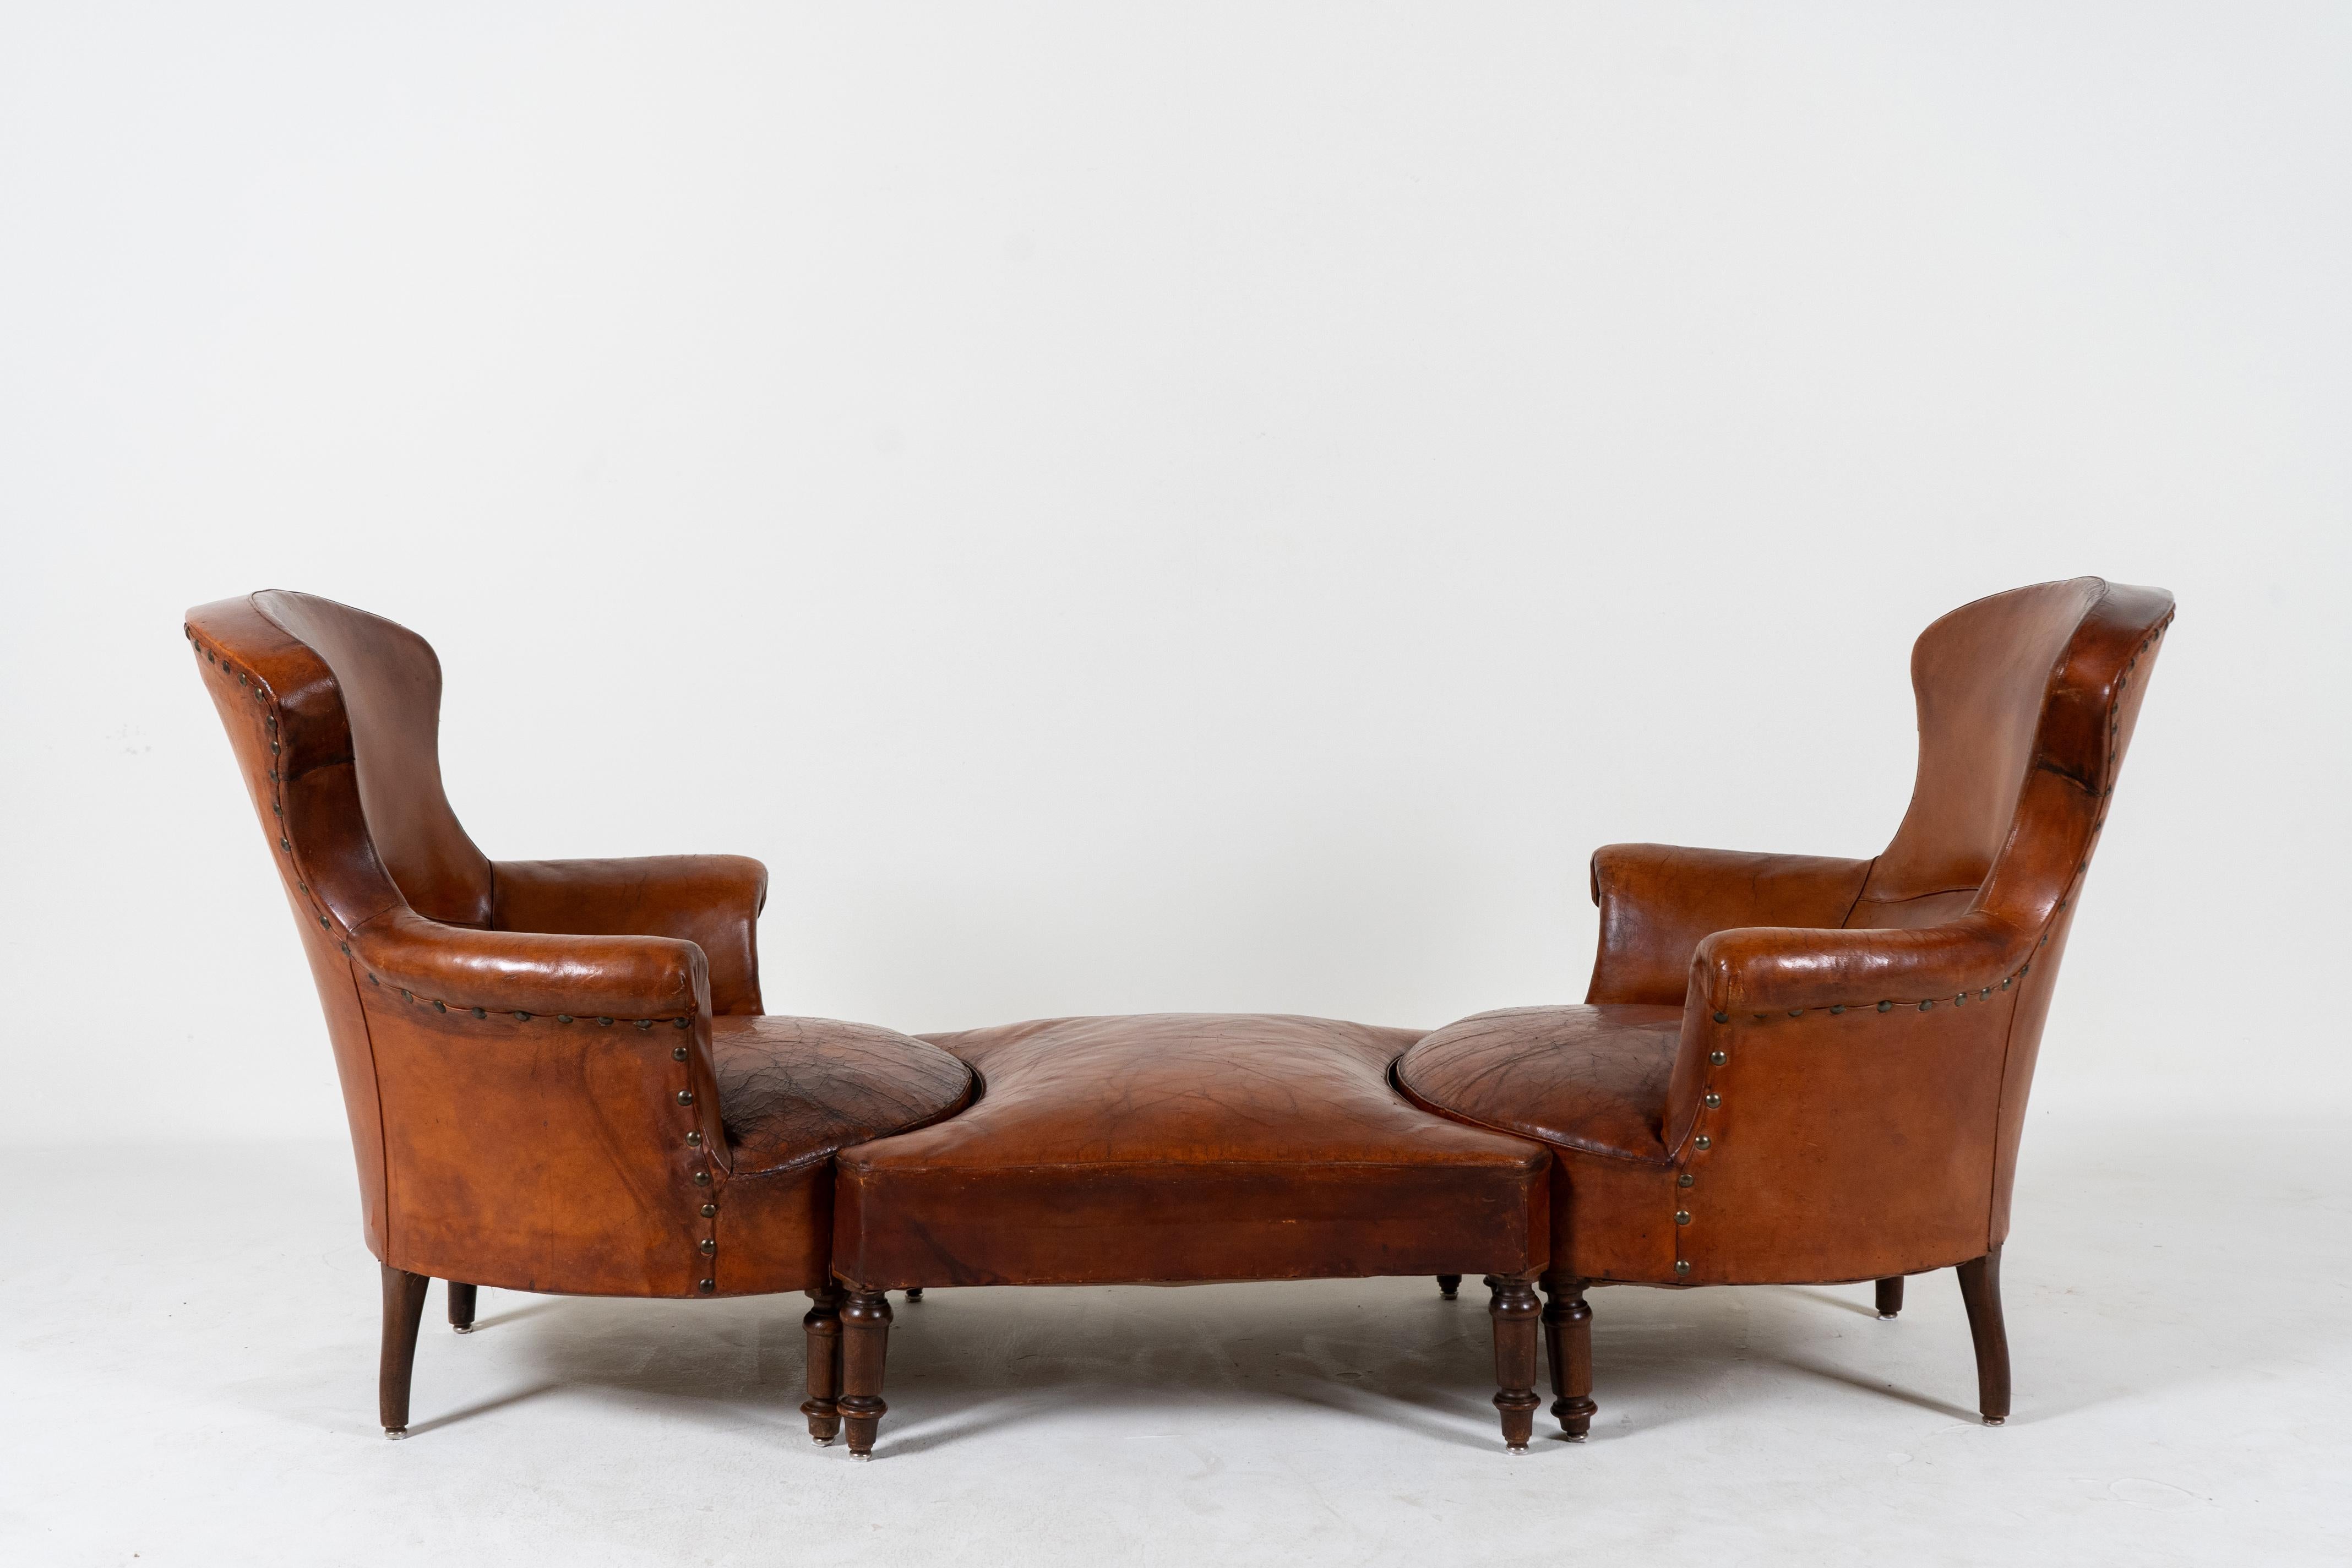 A rare 3-piece French leather chaise lounge set with two chairs and a specially-fitted joining stool.  This is one of the more unusual French leather chair sets we've come across.  Each chair is quite comfortable and desirable on its own, with a